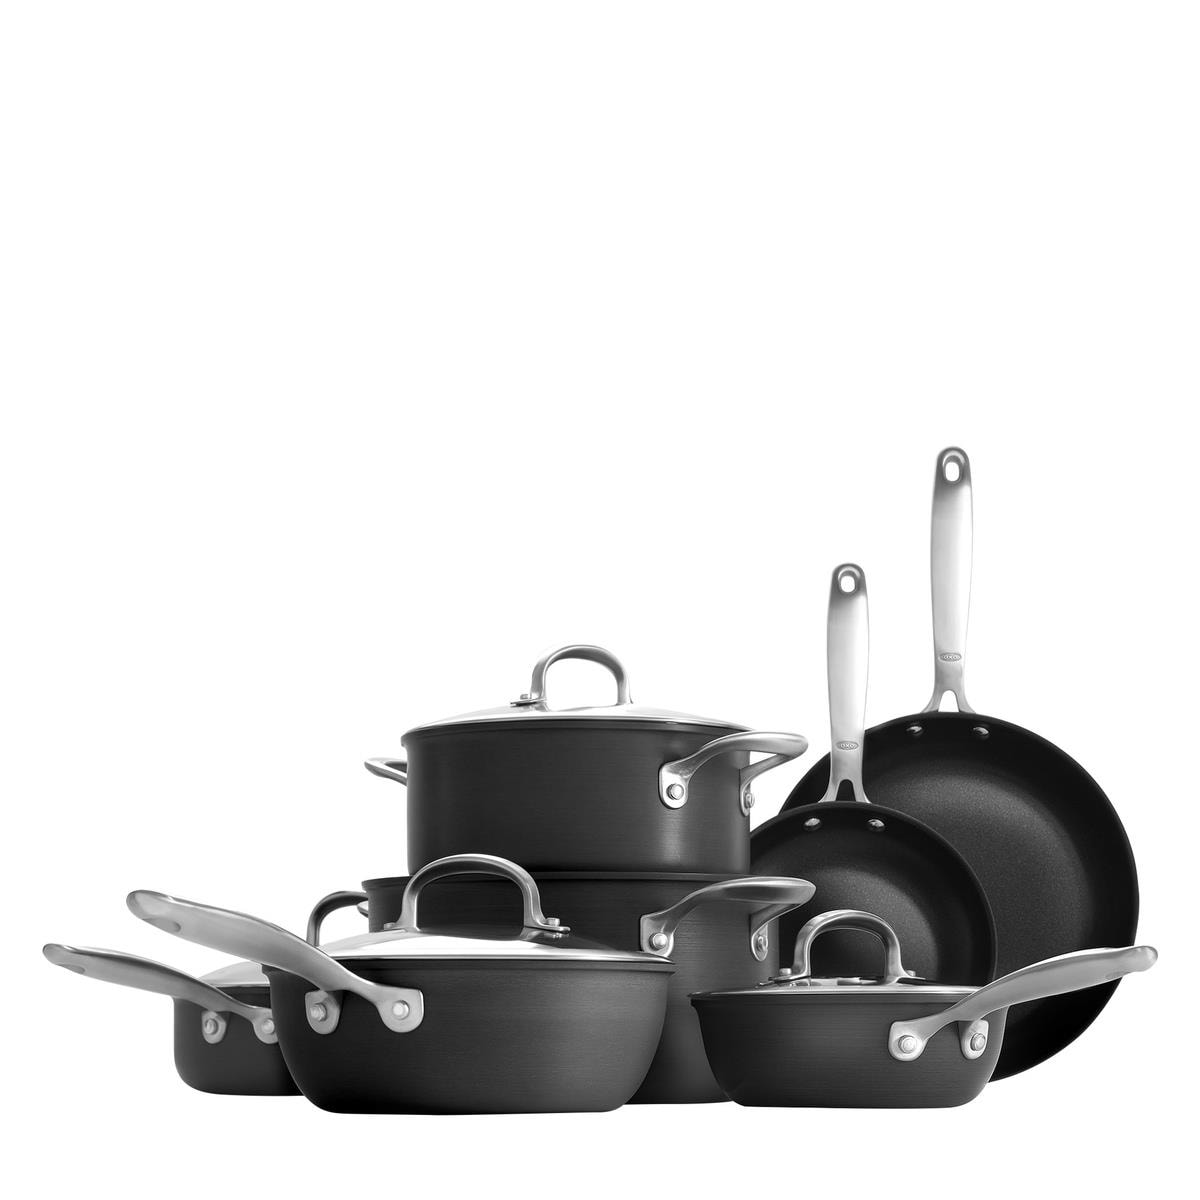 OXO Good Grips 15-in Steel with Non-stick Coating Cookware Set